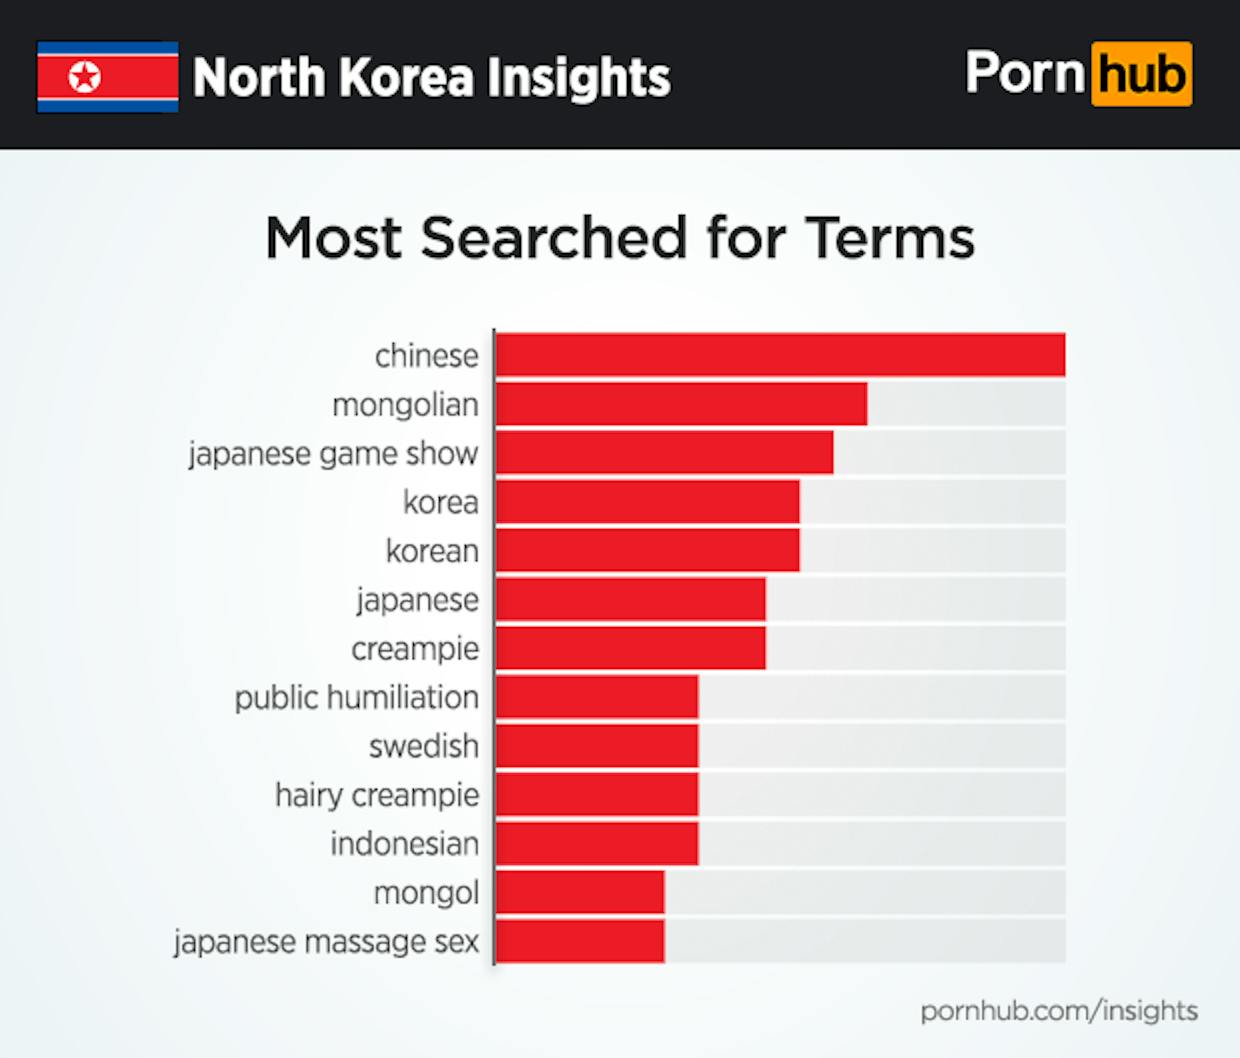 Pornhub Just Released New Data on What North Koreans Watch ...